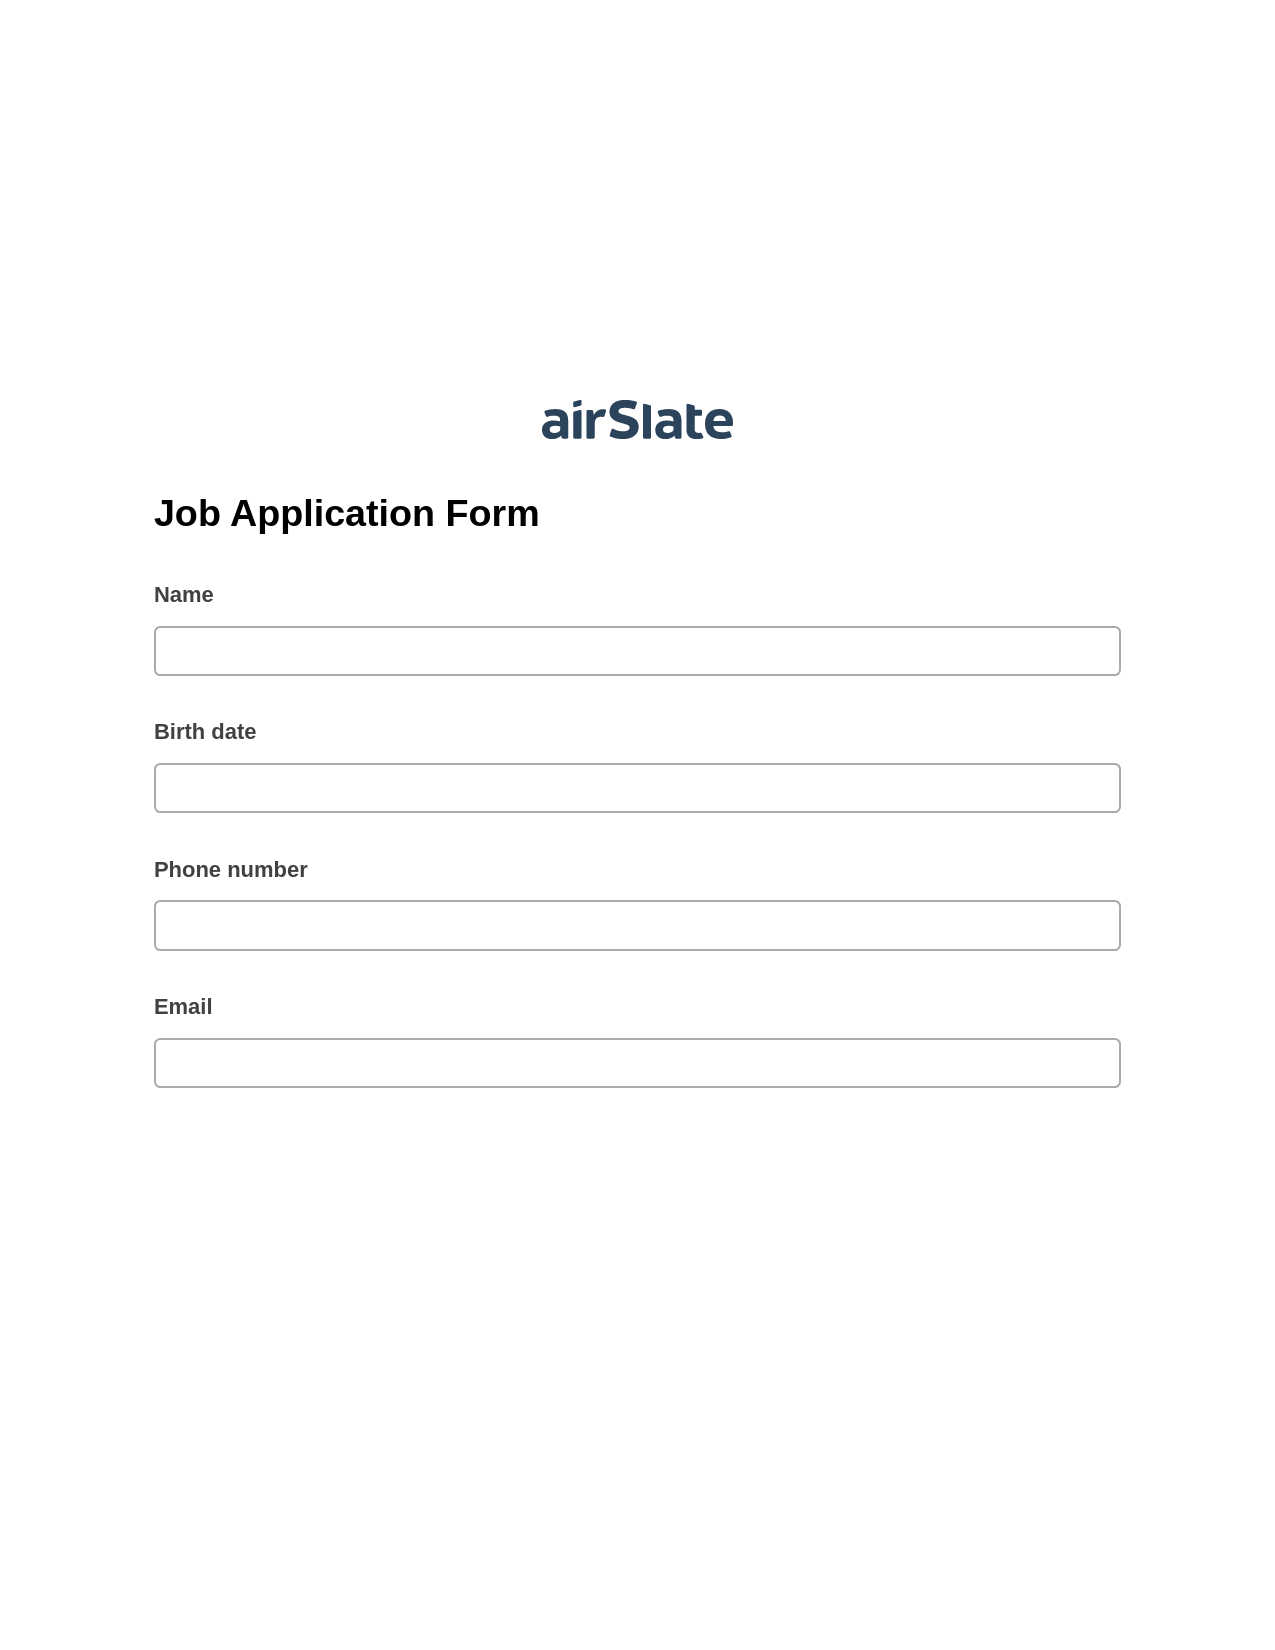 Multirole Job Application Form Pre-fill from Litmos bot, Create NetSuite Records Bot, Export to Formstack Documents Bot